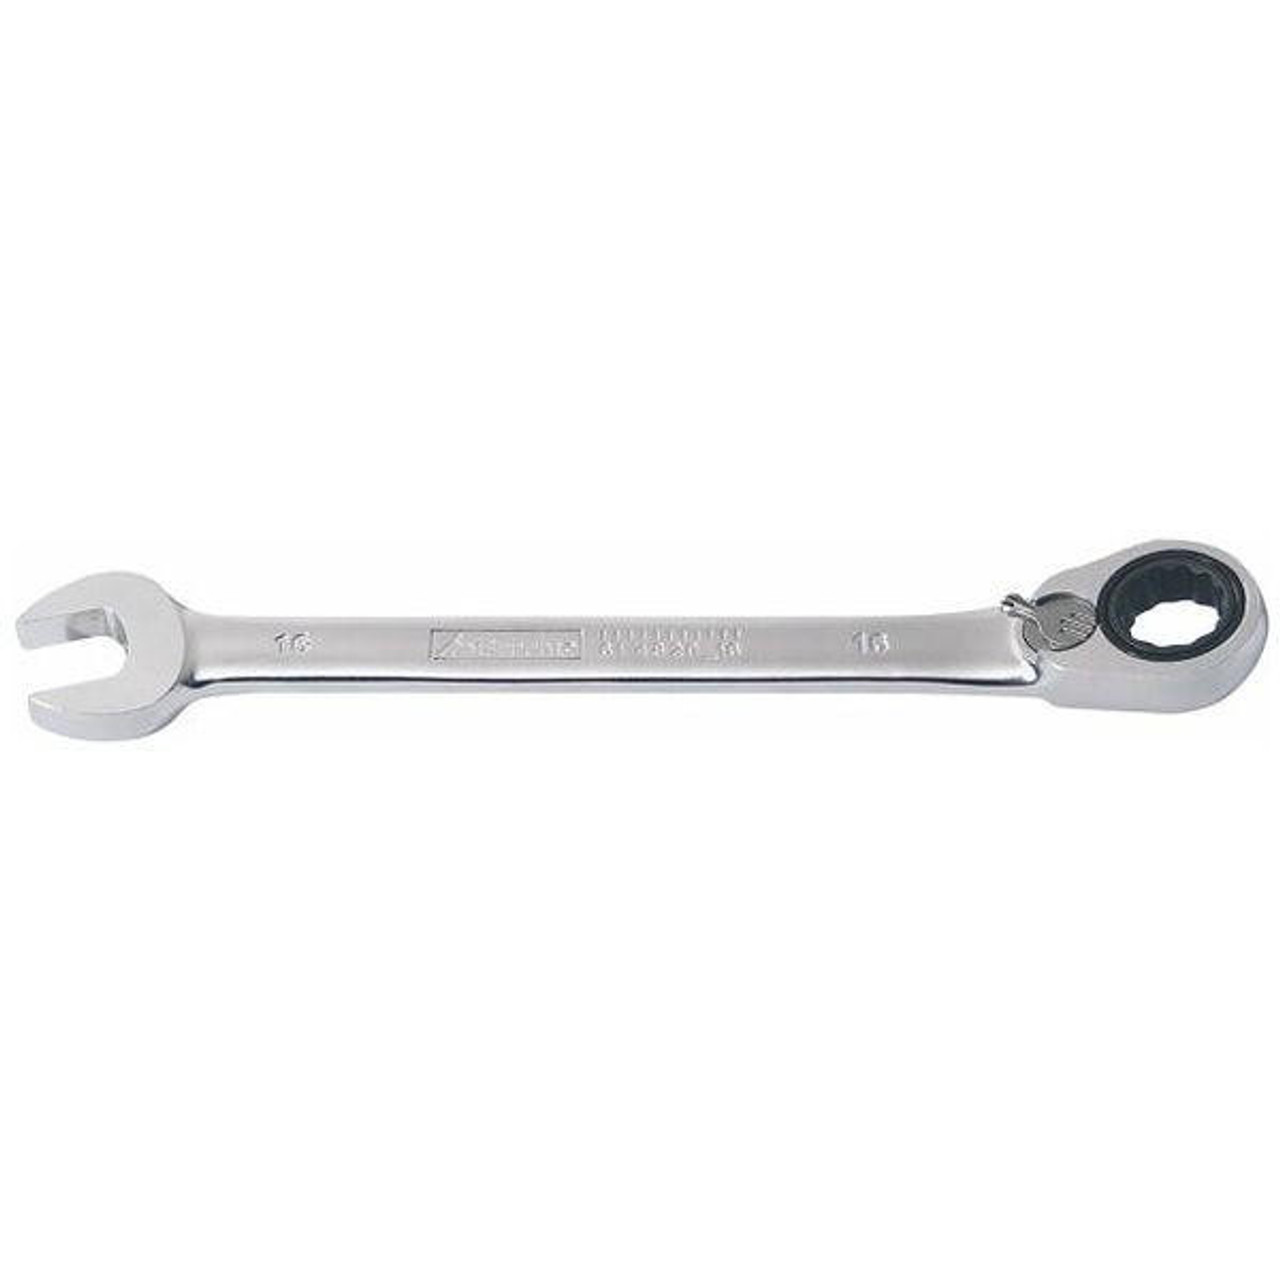 FEANG 3 Sizes Ratchet Spanner Combination Wrench A Set Of India | Ubuy